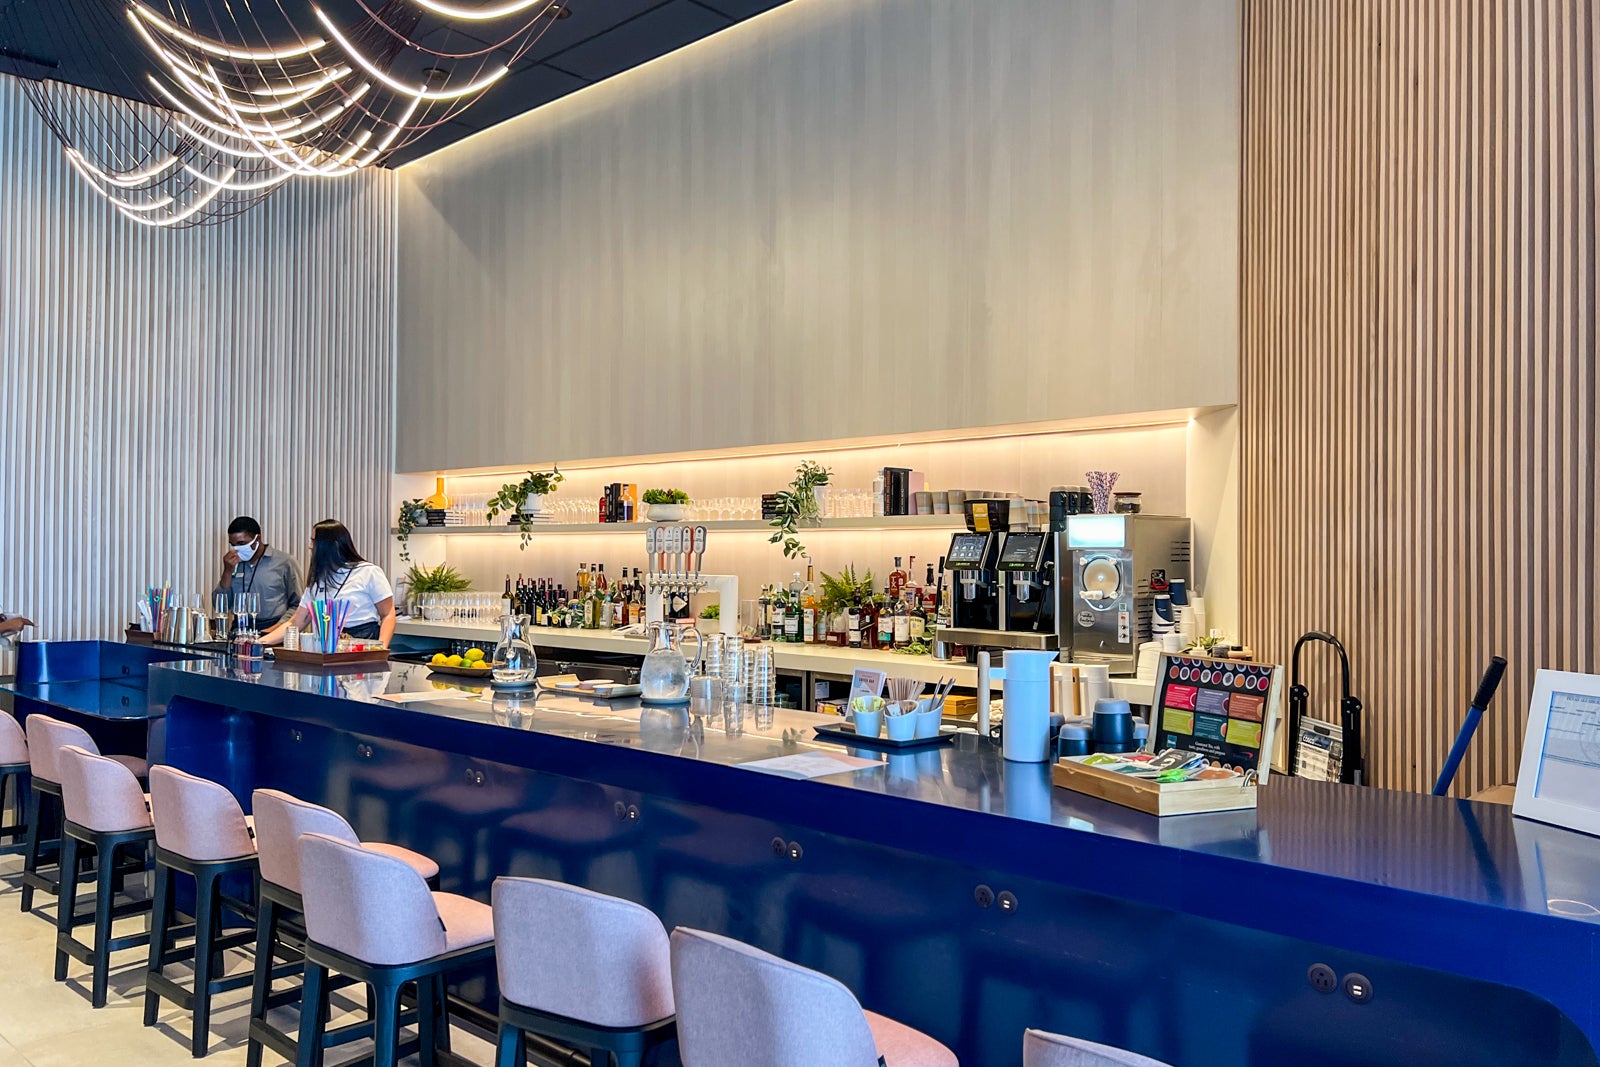 Choosing the best airport lounge at DFW — and how you can get inside